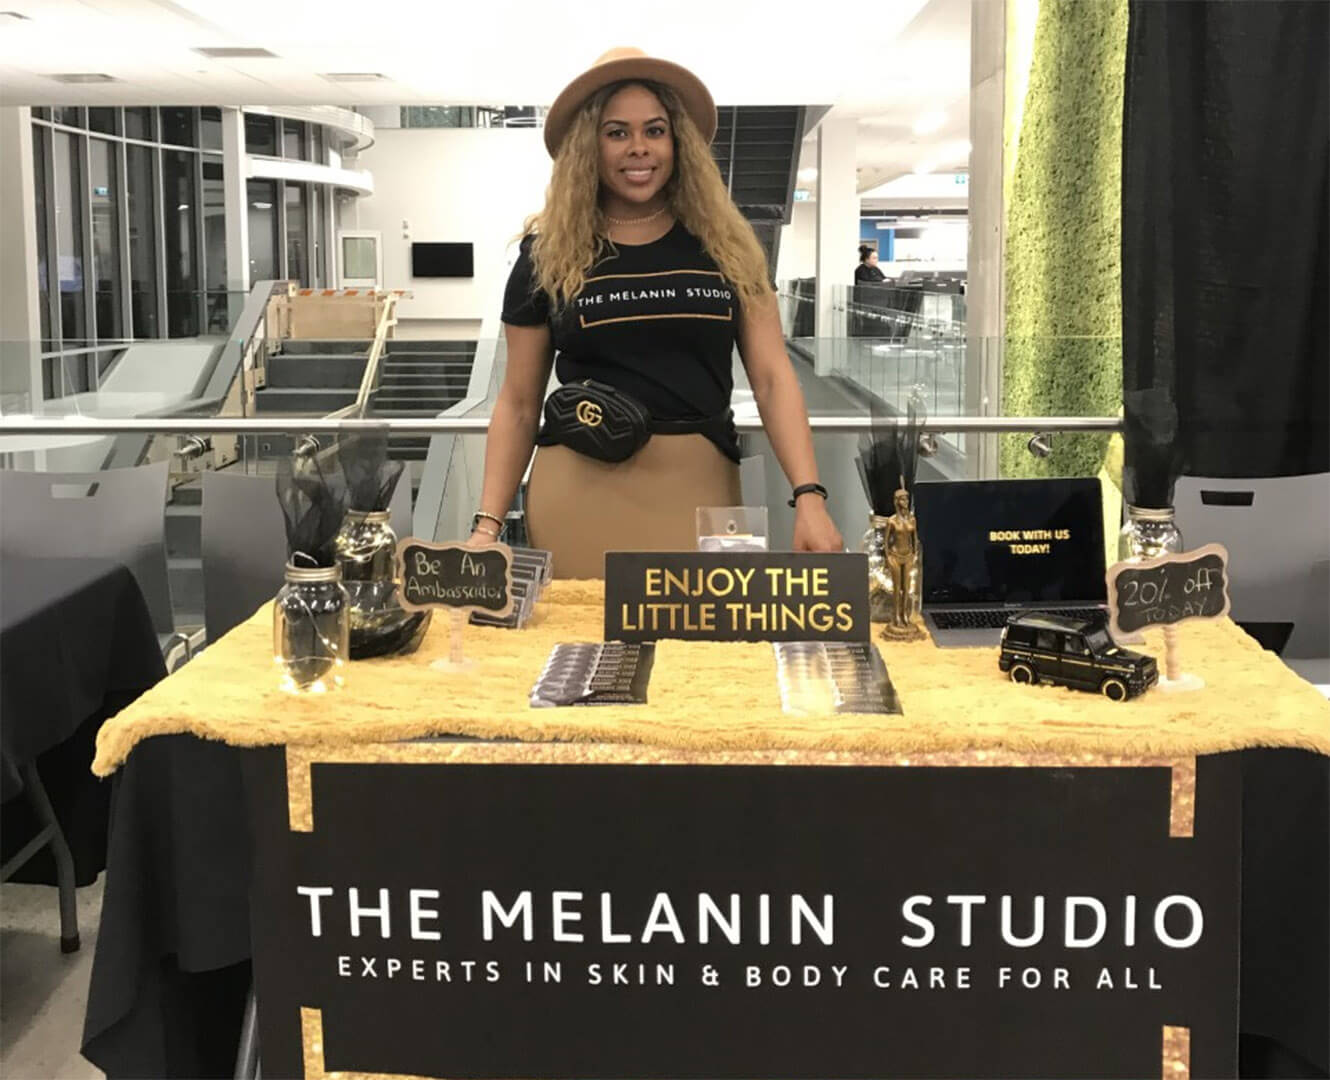 Woman stands at table selling skin care products